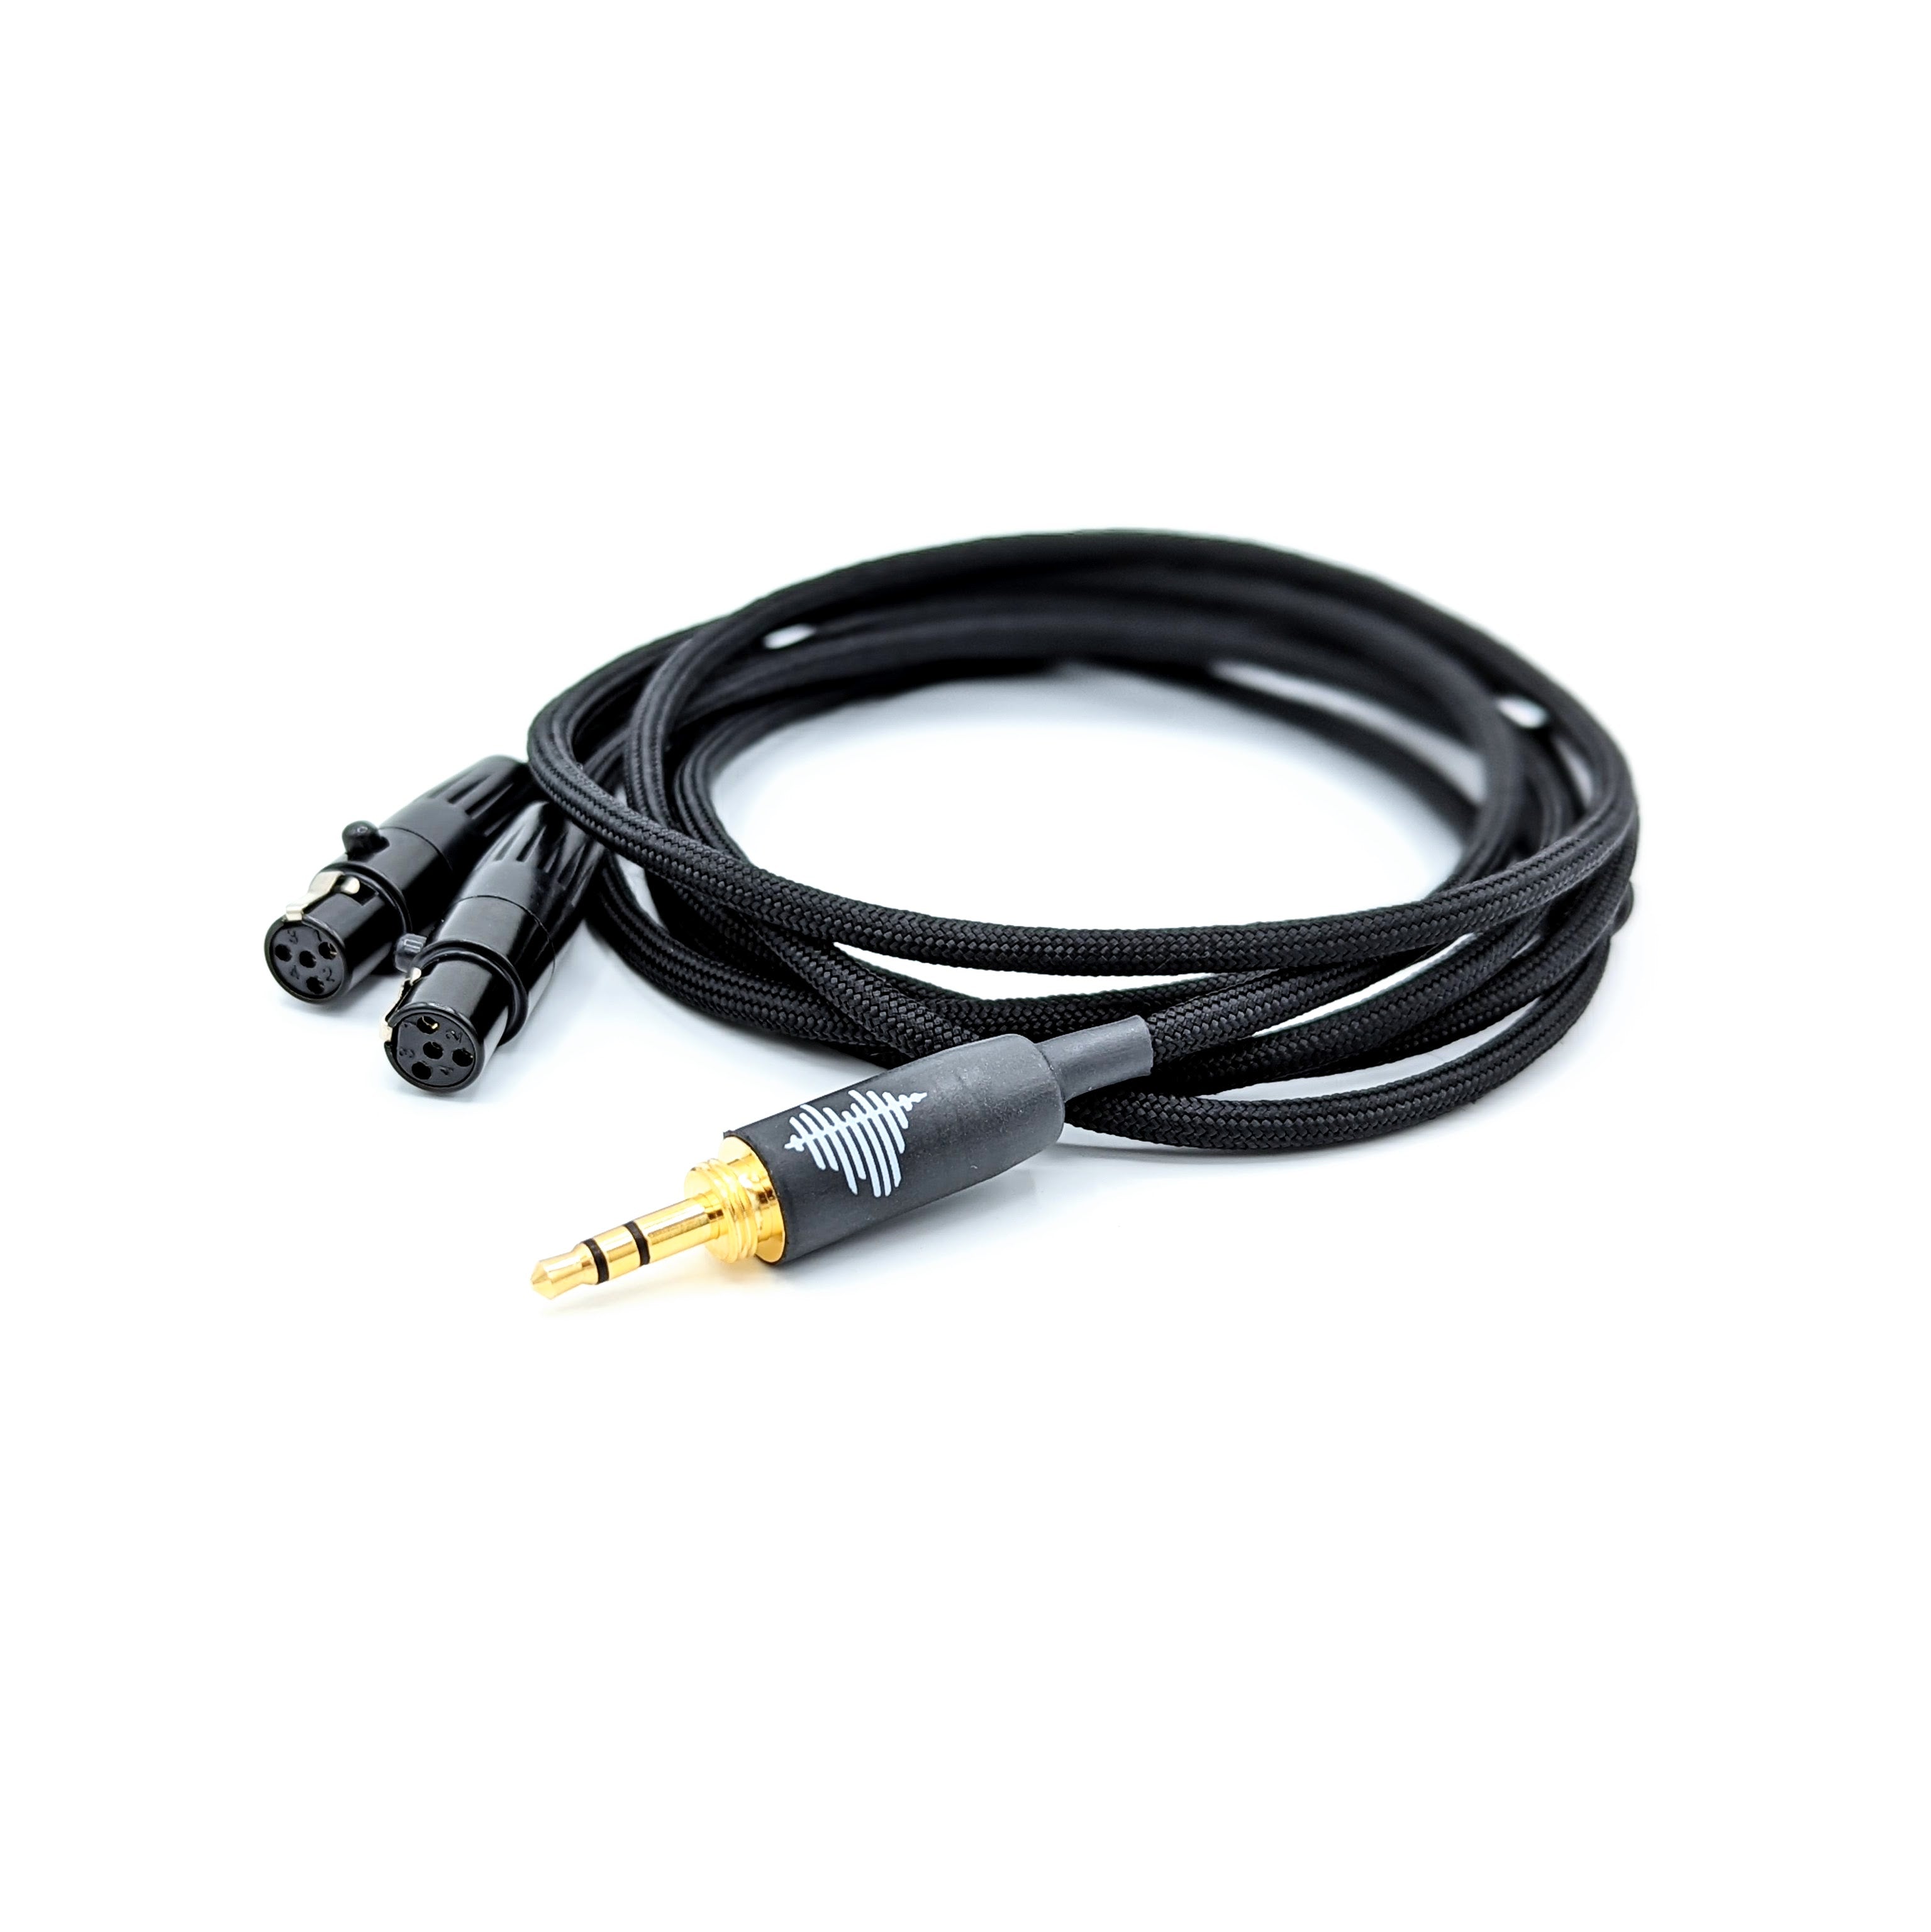 Dual 4-pin mini-xlr cable for Audeze / ZMF and more – Hart Audio